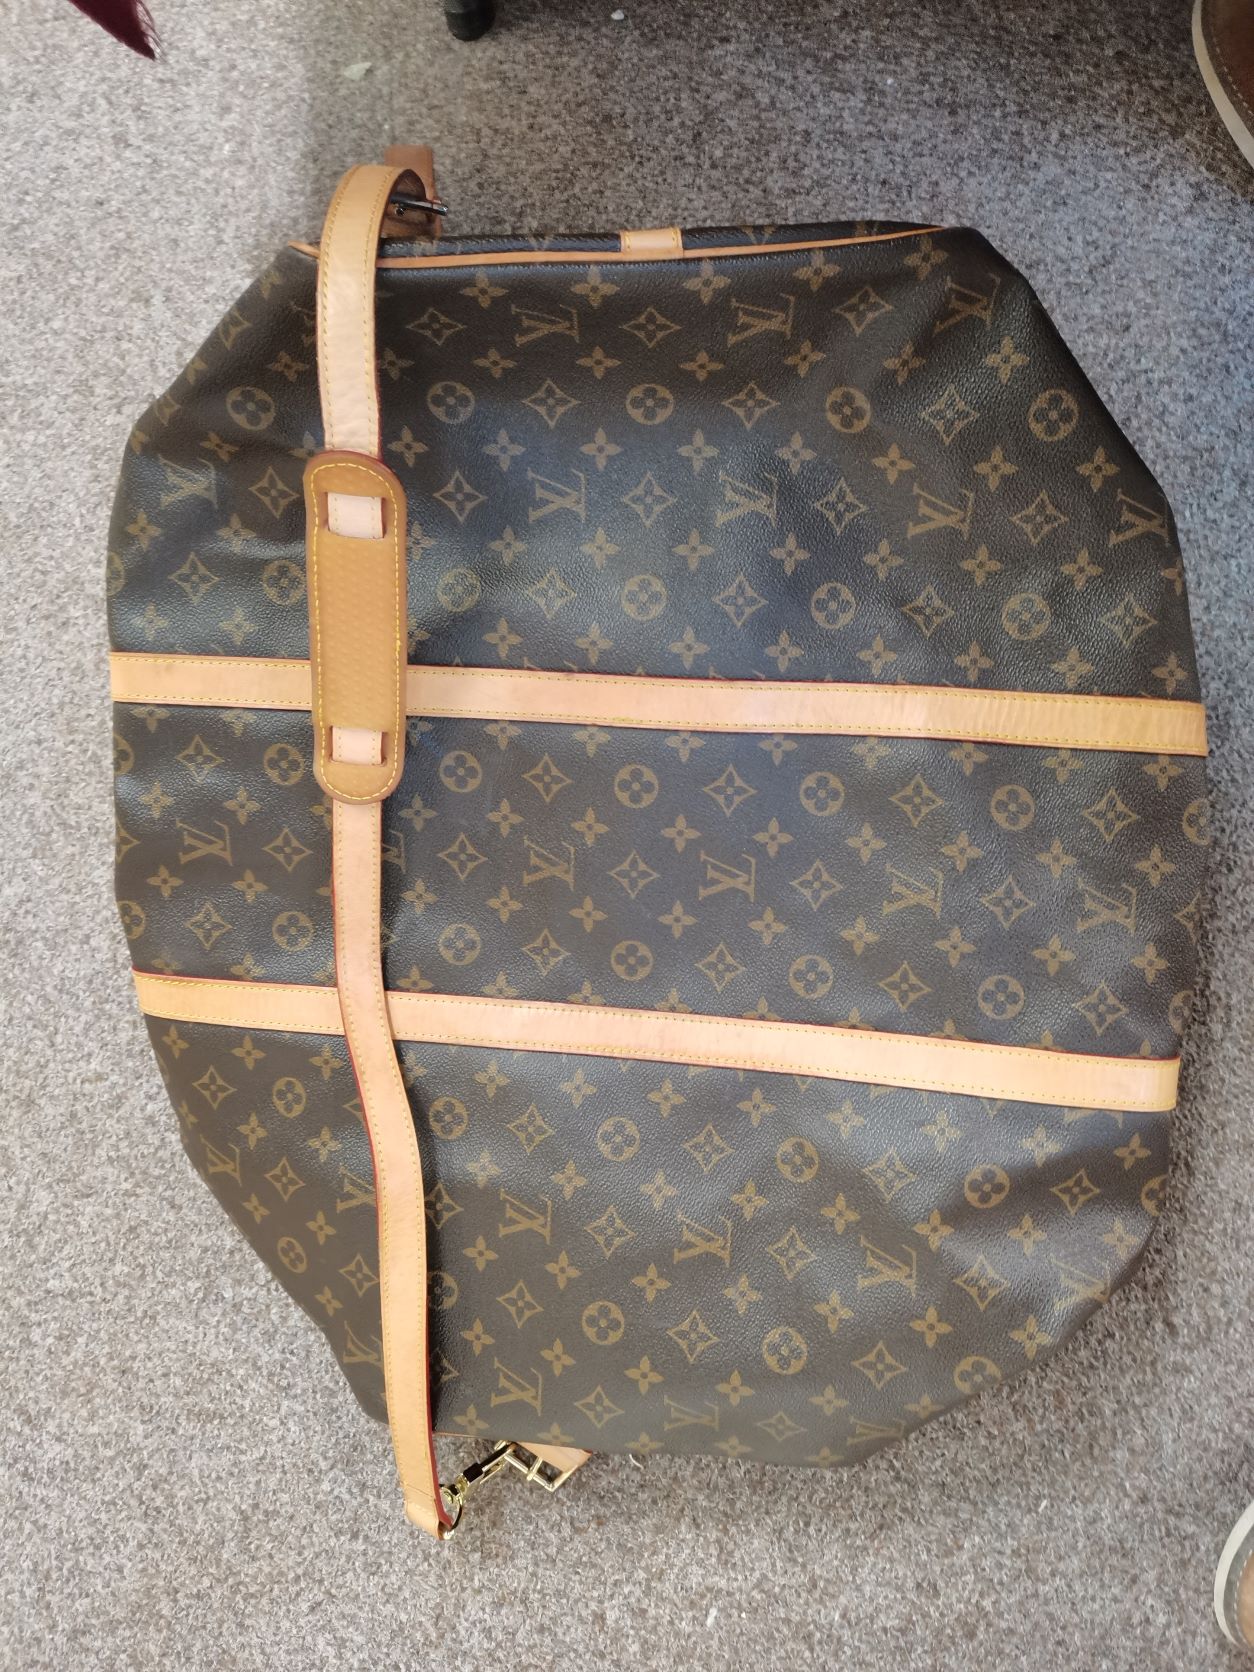 Genuine Louis Vuitton suit carrier and Keepall Duffel brown bag and a Visconti leather documents - Image 2 of 17